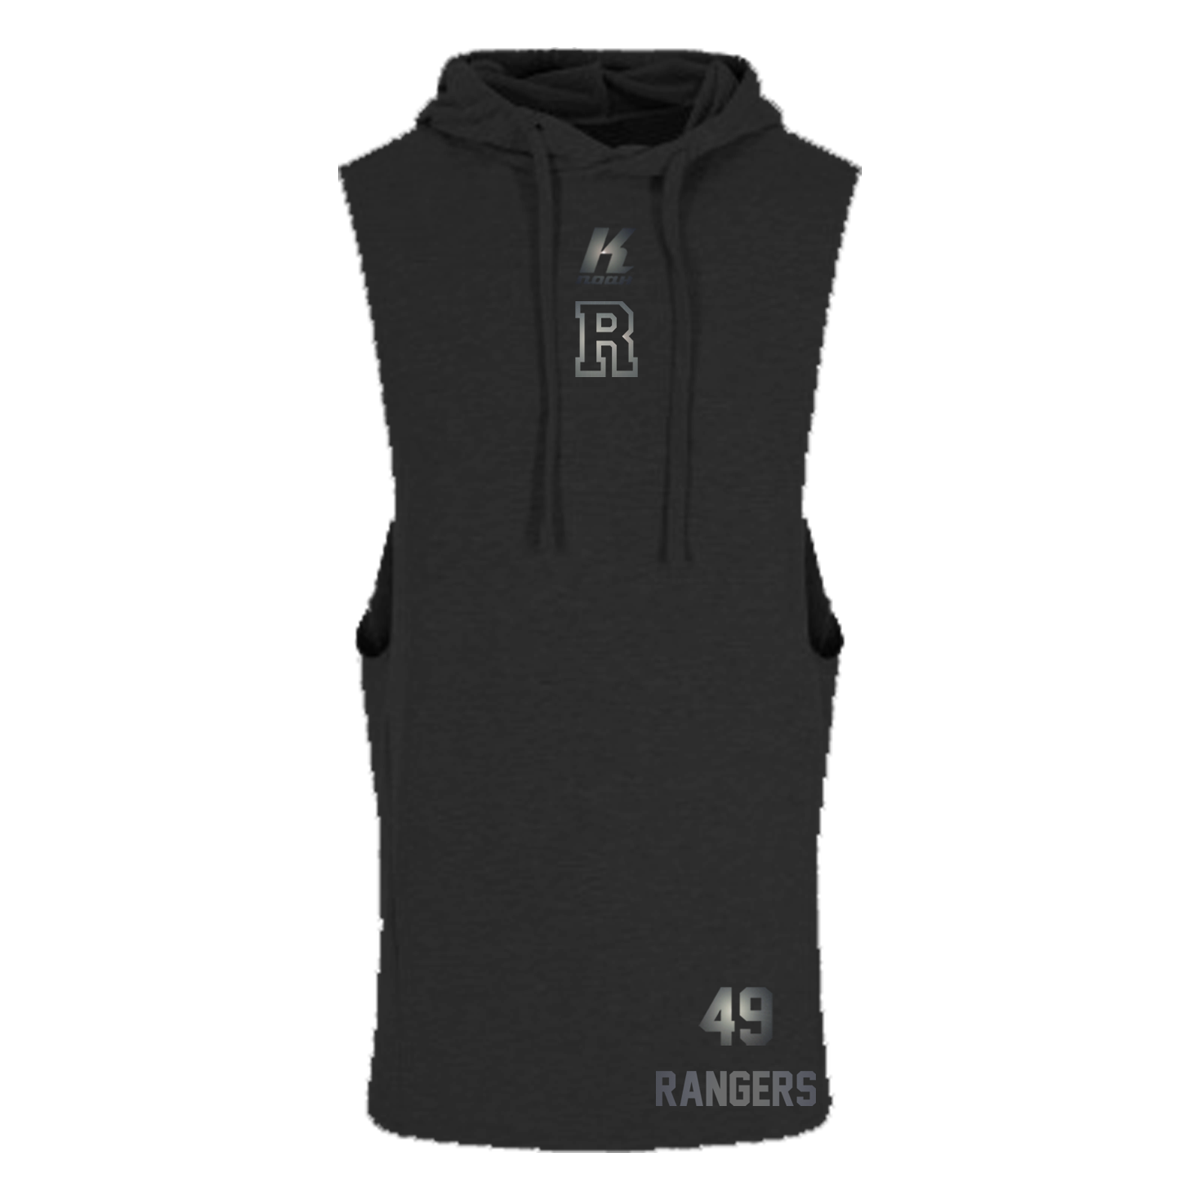 Rangers "Blackline" Sleeveless Muscle Hoodie JC053 with Playernumber or Initials